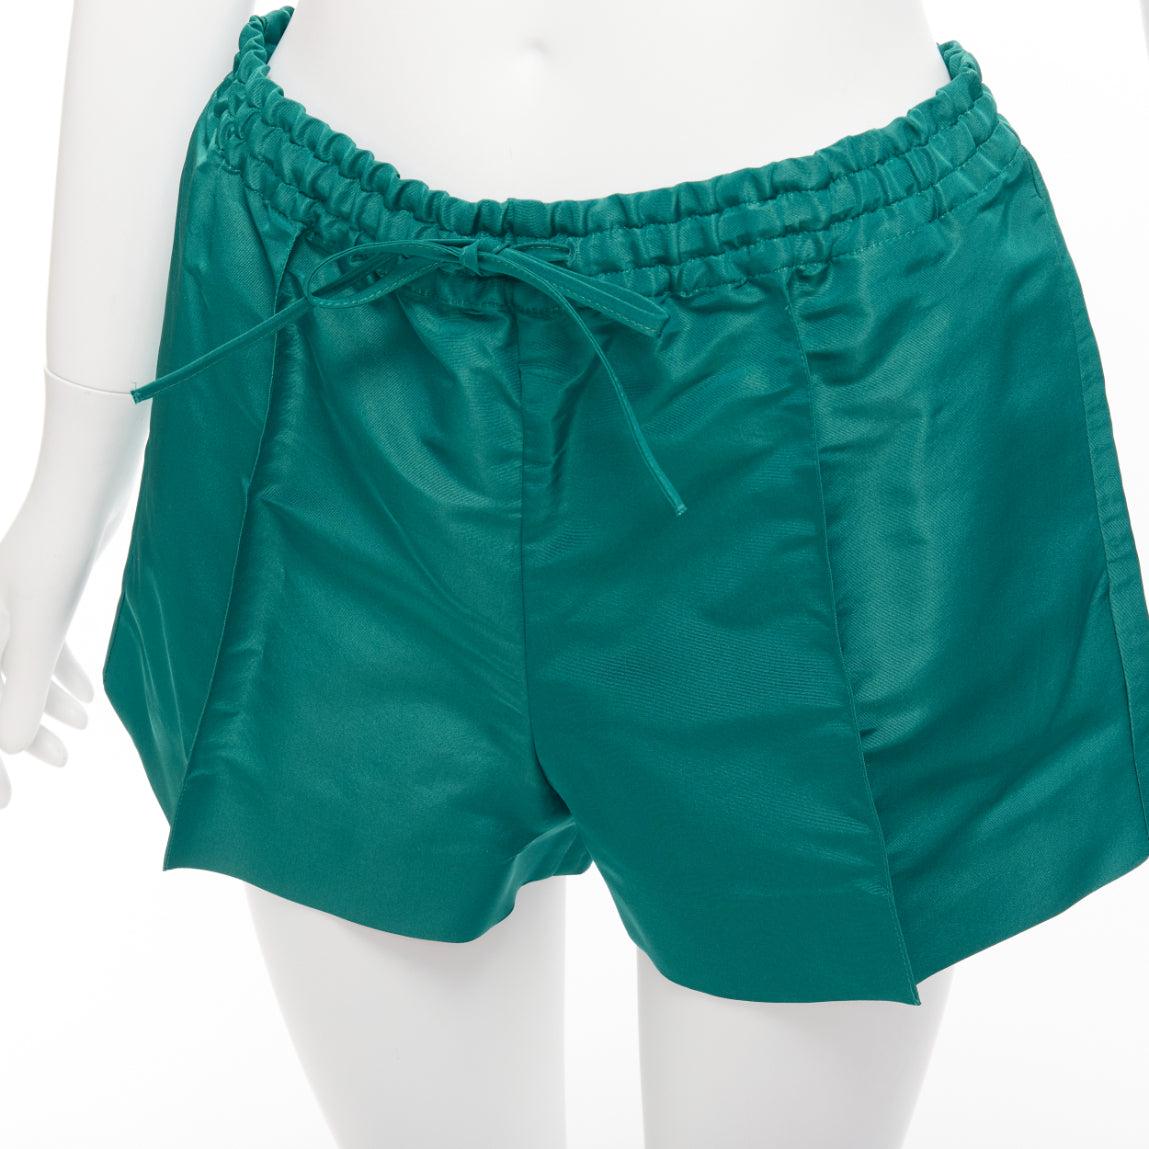 VALENTINO 100% silk Piccioli green high waist drawstring shorts IT38 XS
Reference: AAWC/A00885
Brand: Valentino
Designer: Pier Paolo Piccioli
Material: Silk
Color: Green
Pattern: Solid
Closure: Drawstring
Made in: Italy

CONDITION:
Condition: